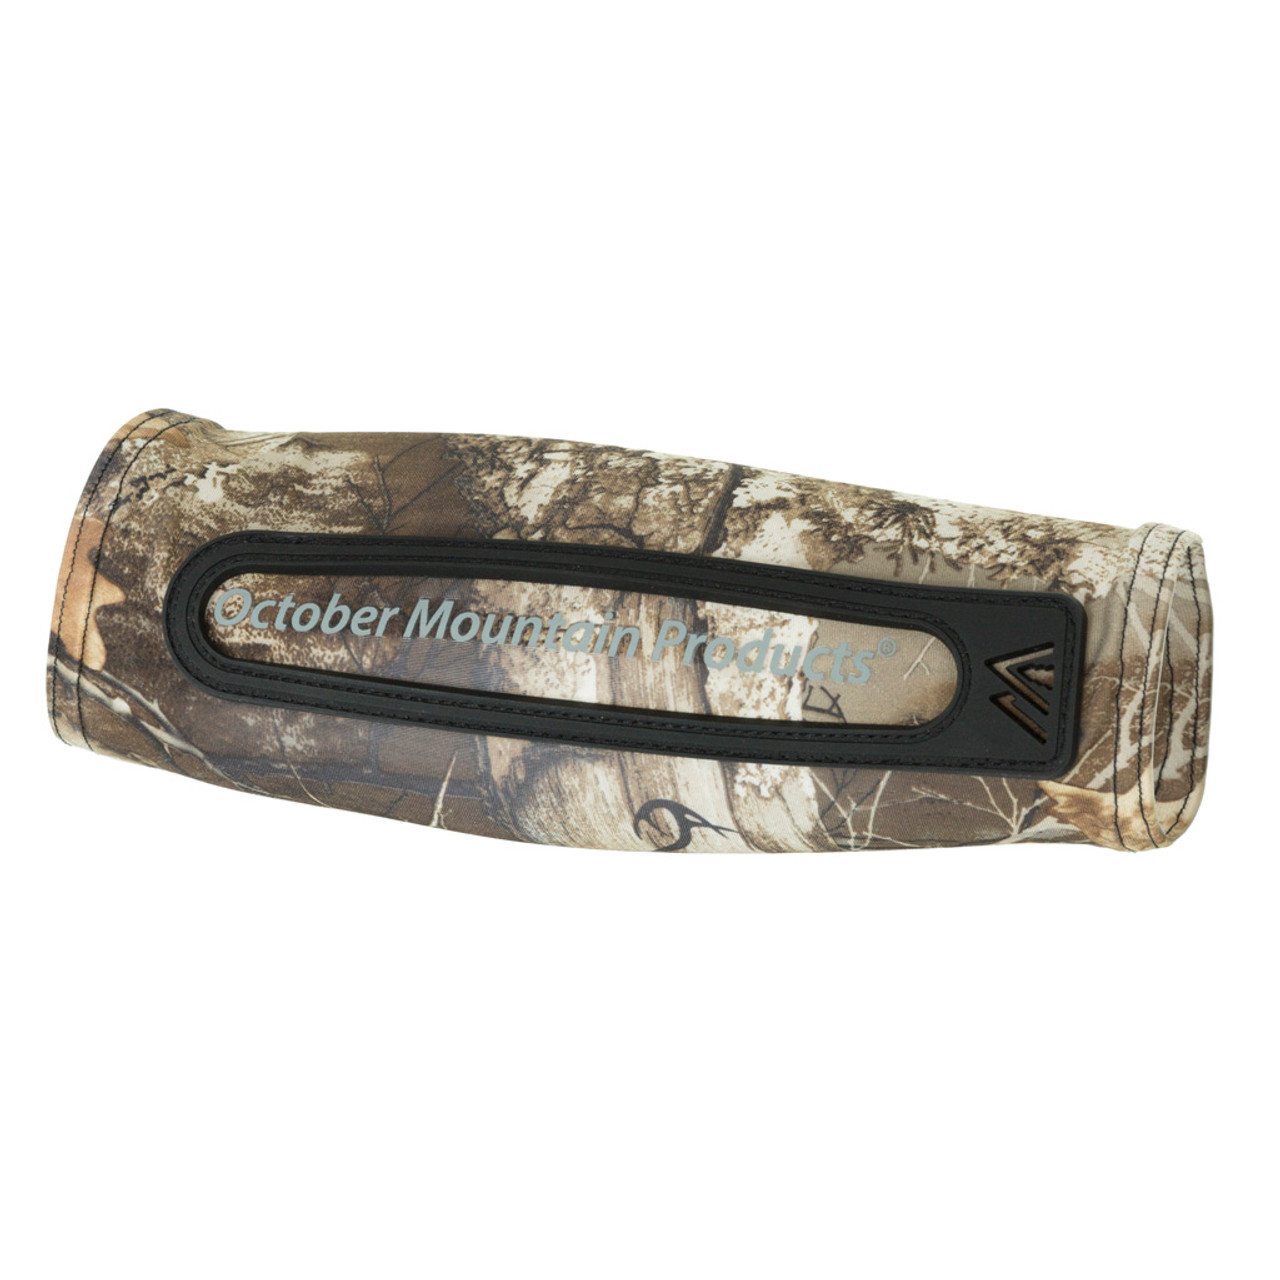 October Mountain - 1601162 - October Mountain Compression Arm Guard Realtree Edge Jacket Fit